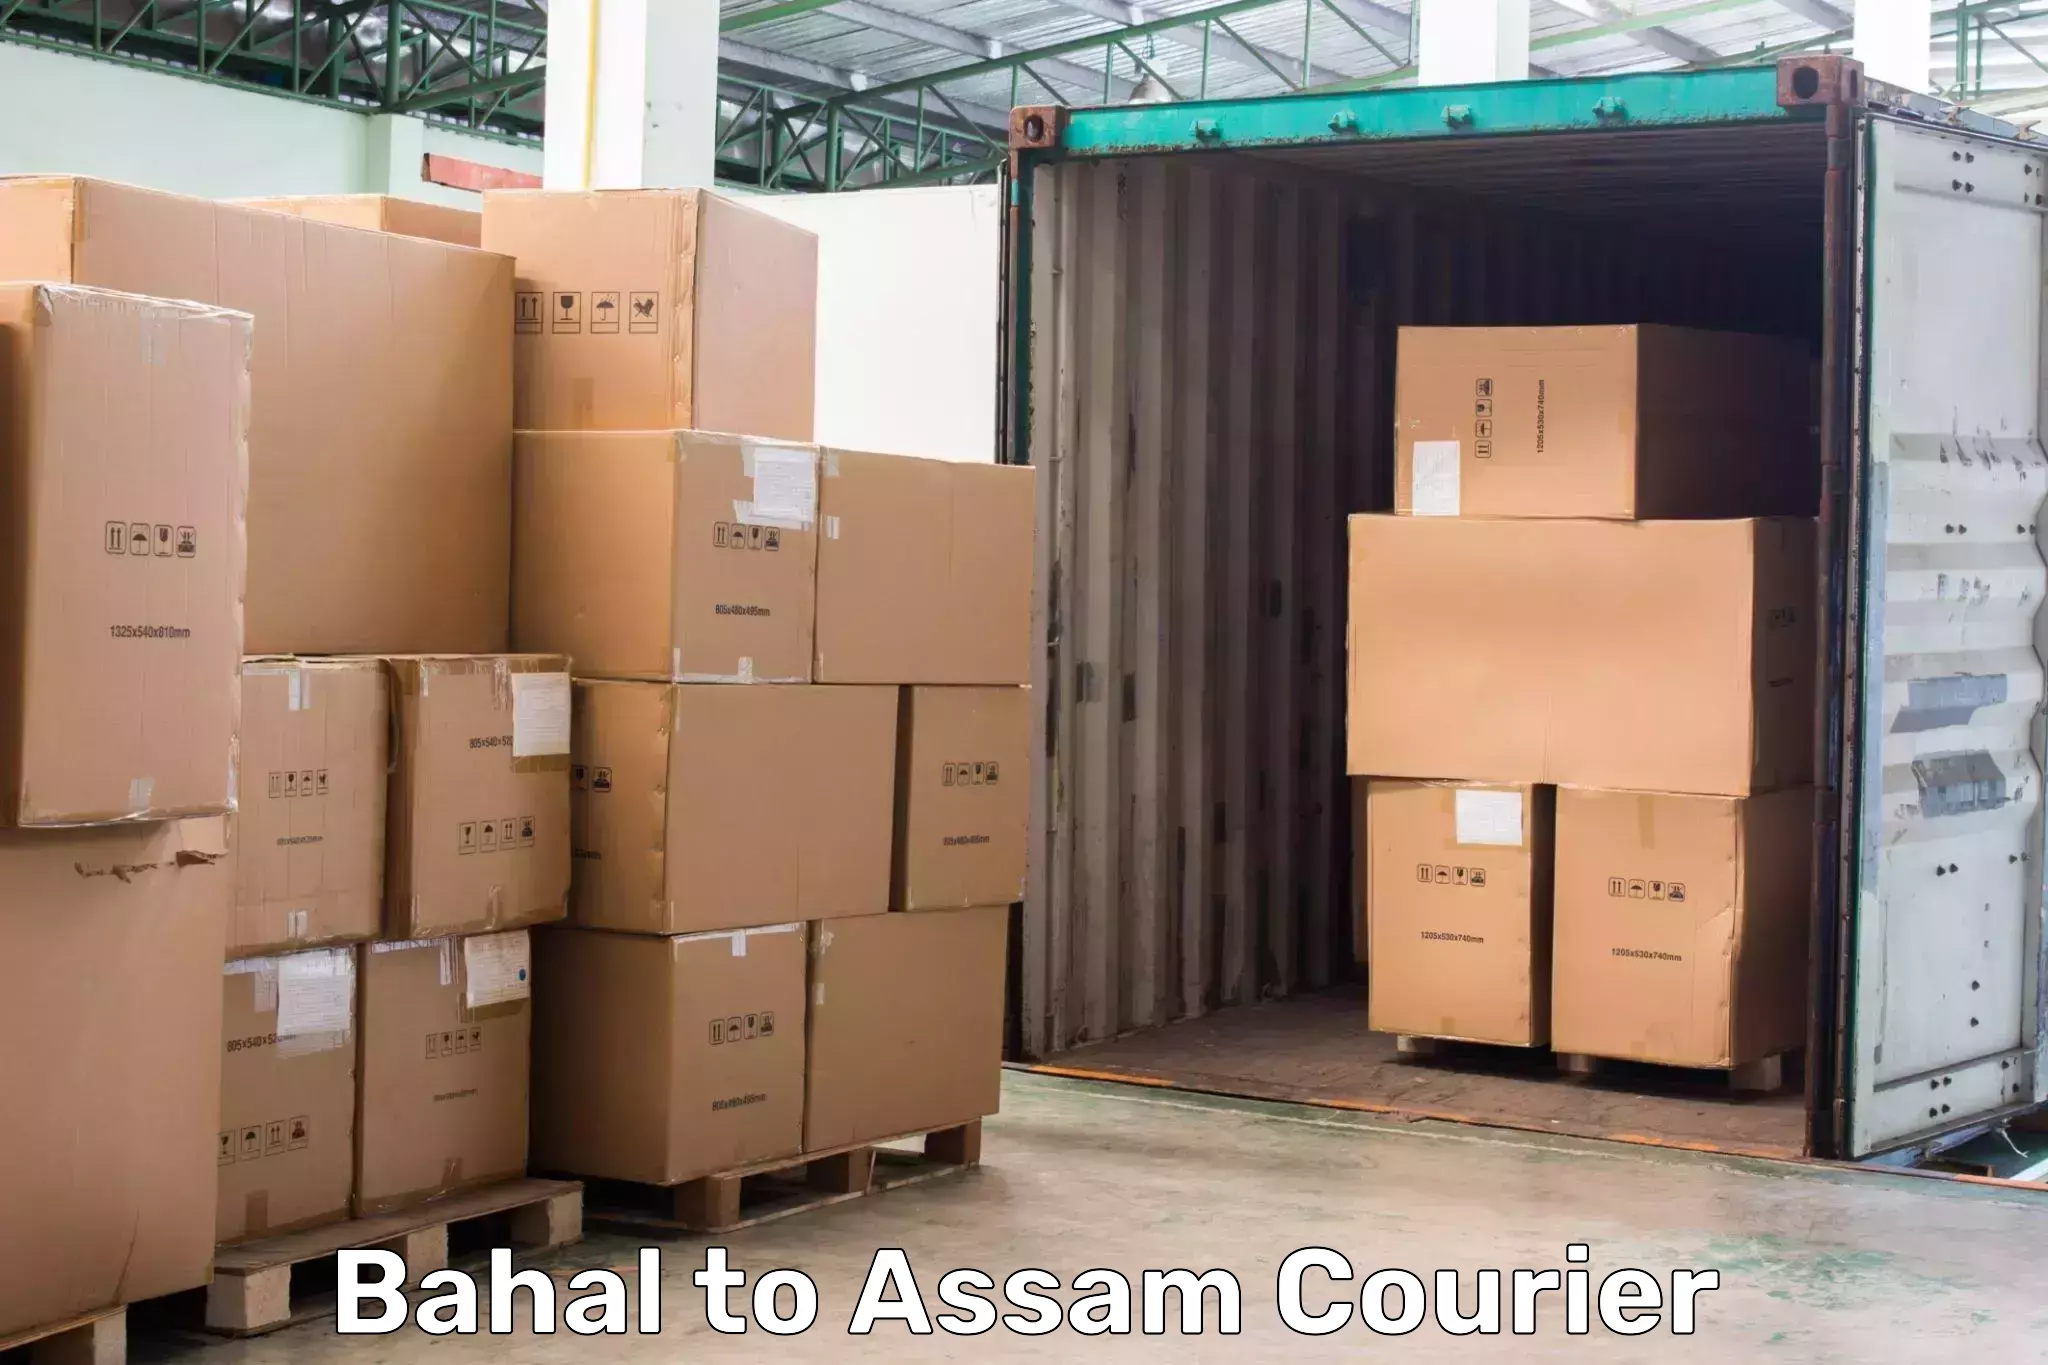 Global shipping networks Bahal to Assam